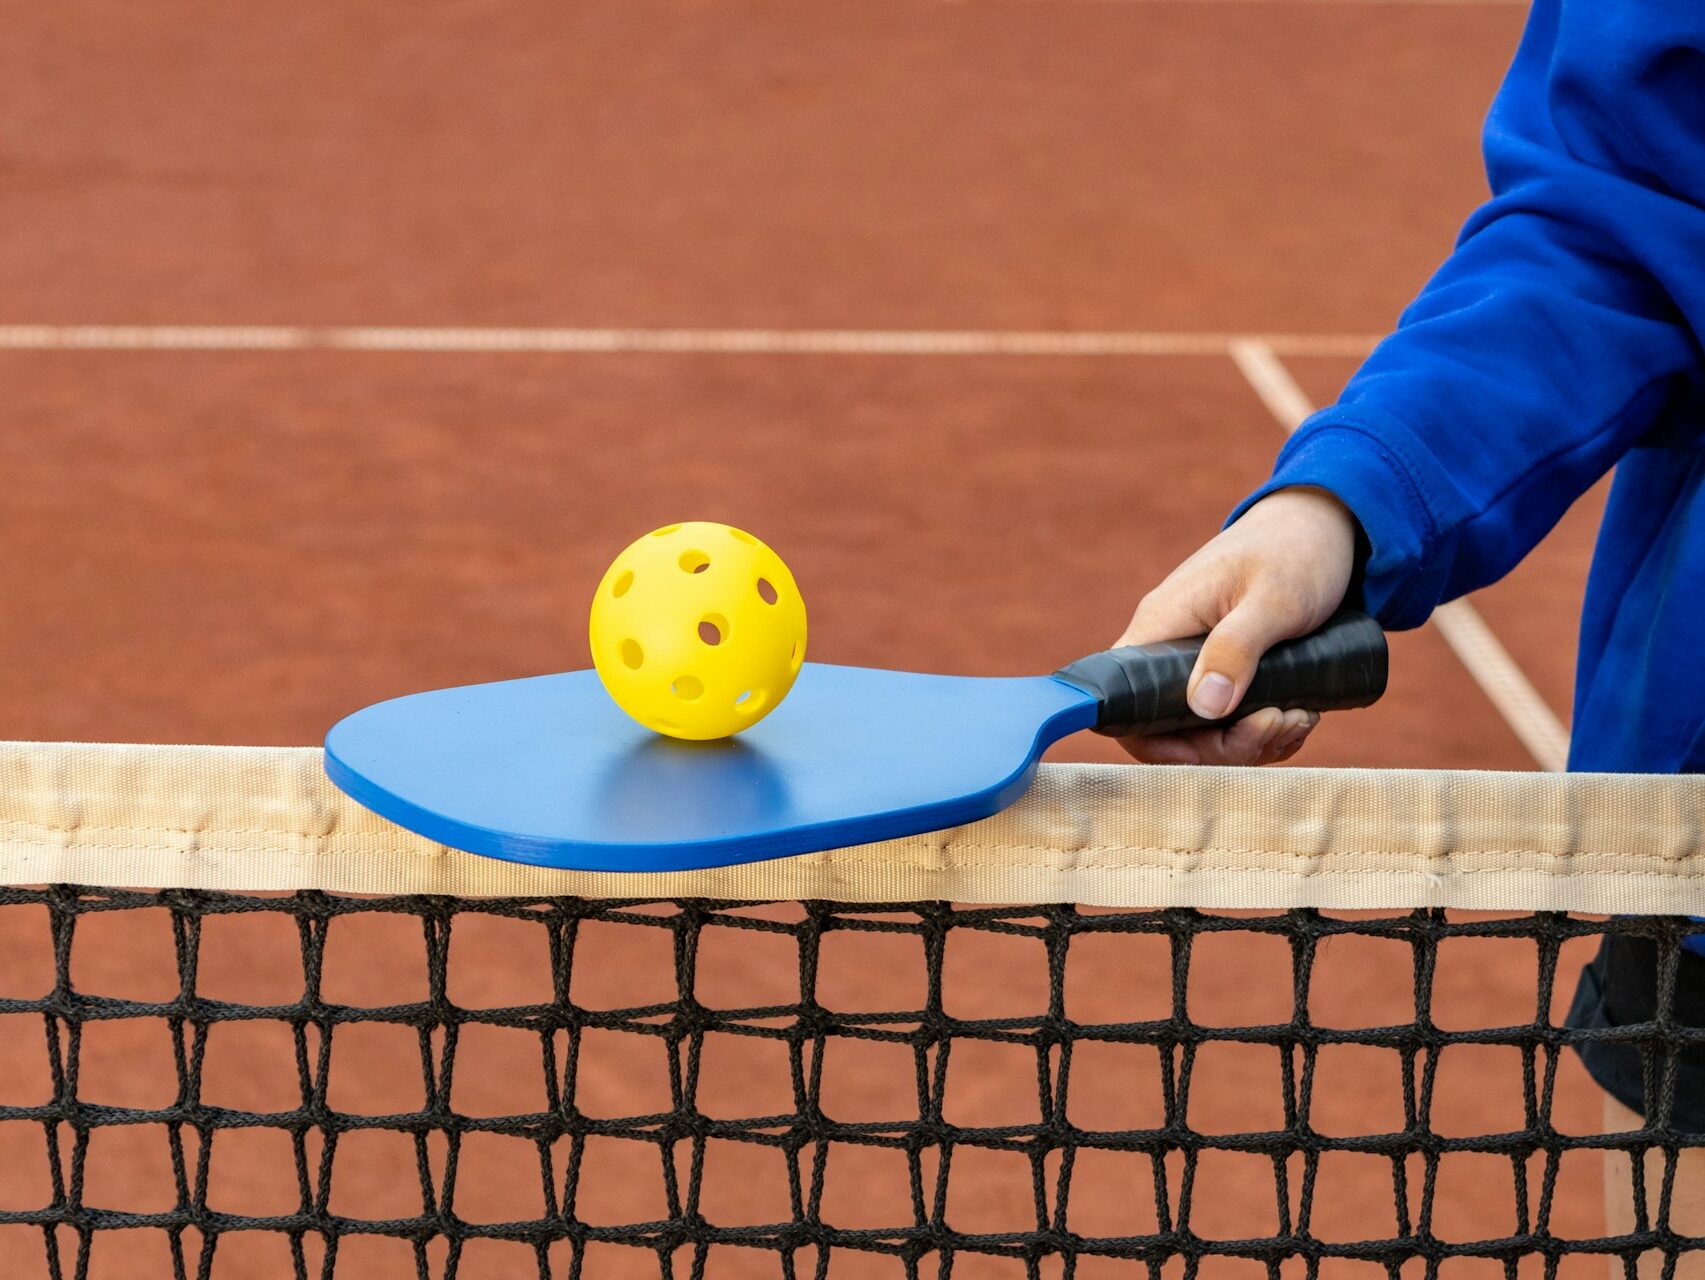 a person holding a pickleball racket balancing a pickleball on top